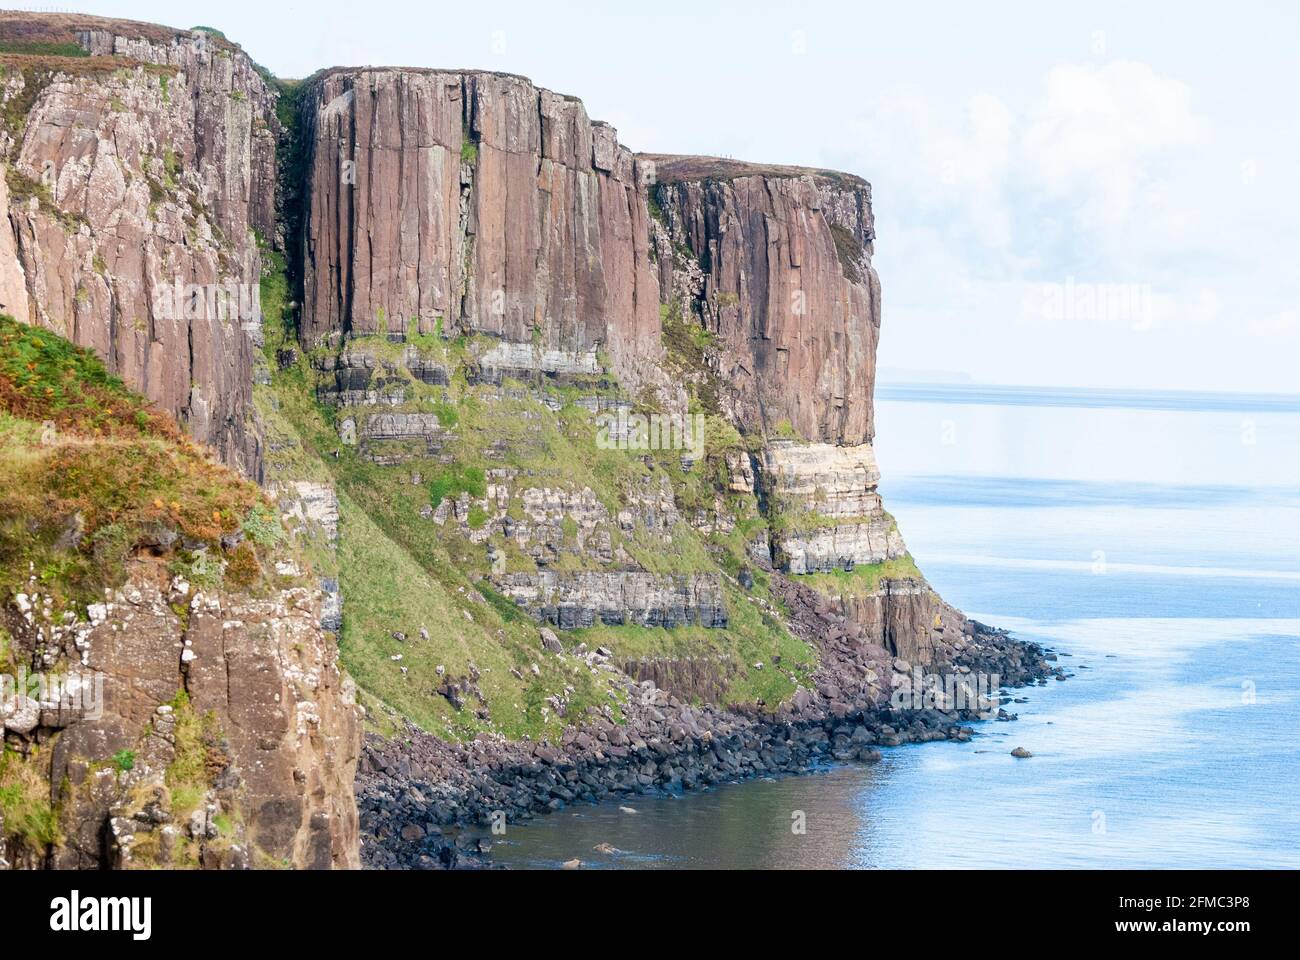 Pillars of the Kilt Rock (Creag an Fheilidh) formation in the Isle of Skye in Scotland. Stock Photo